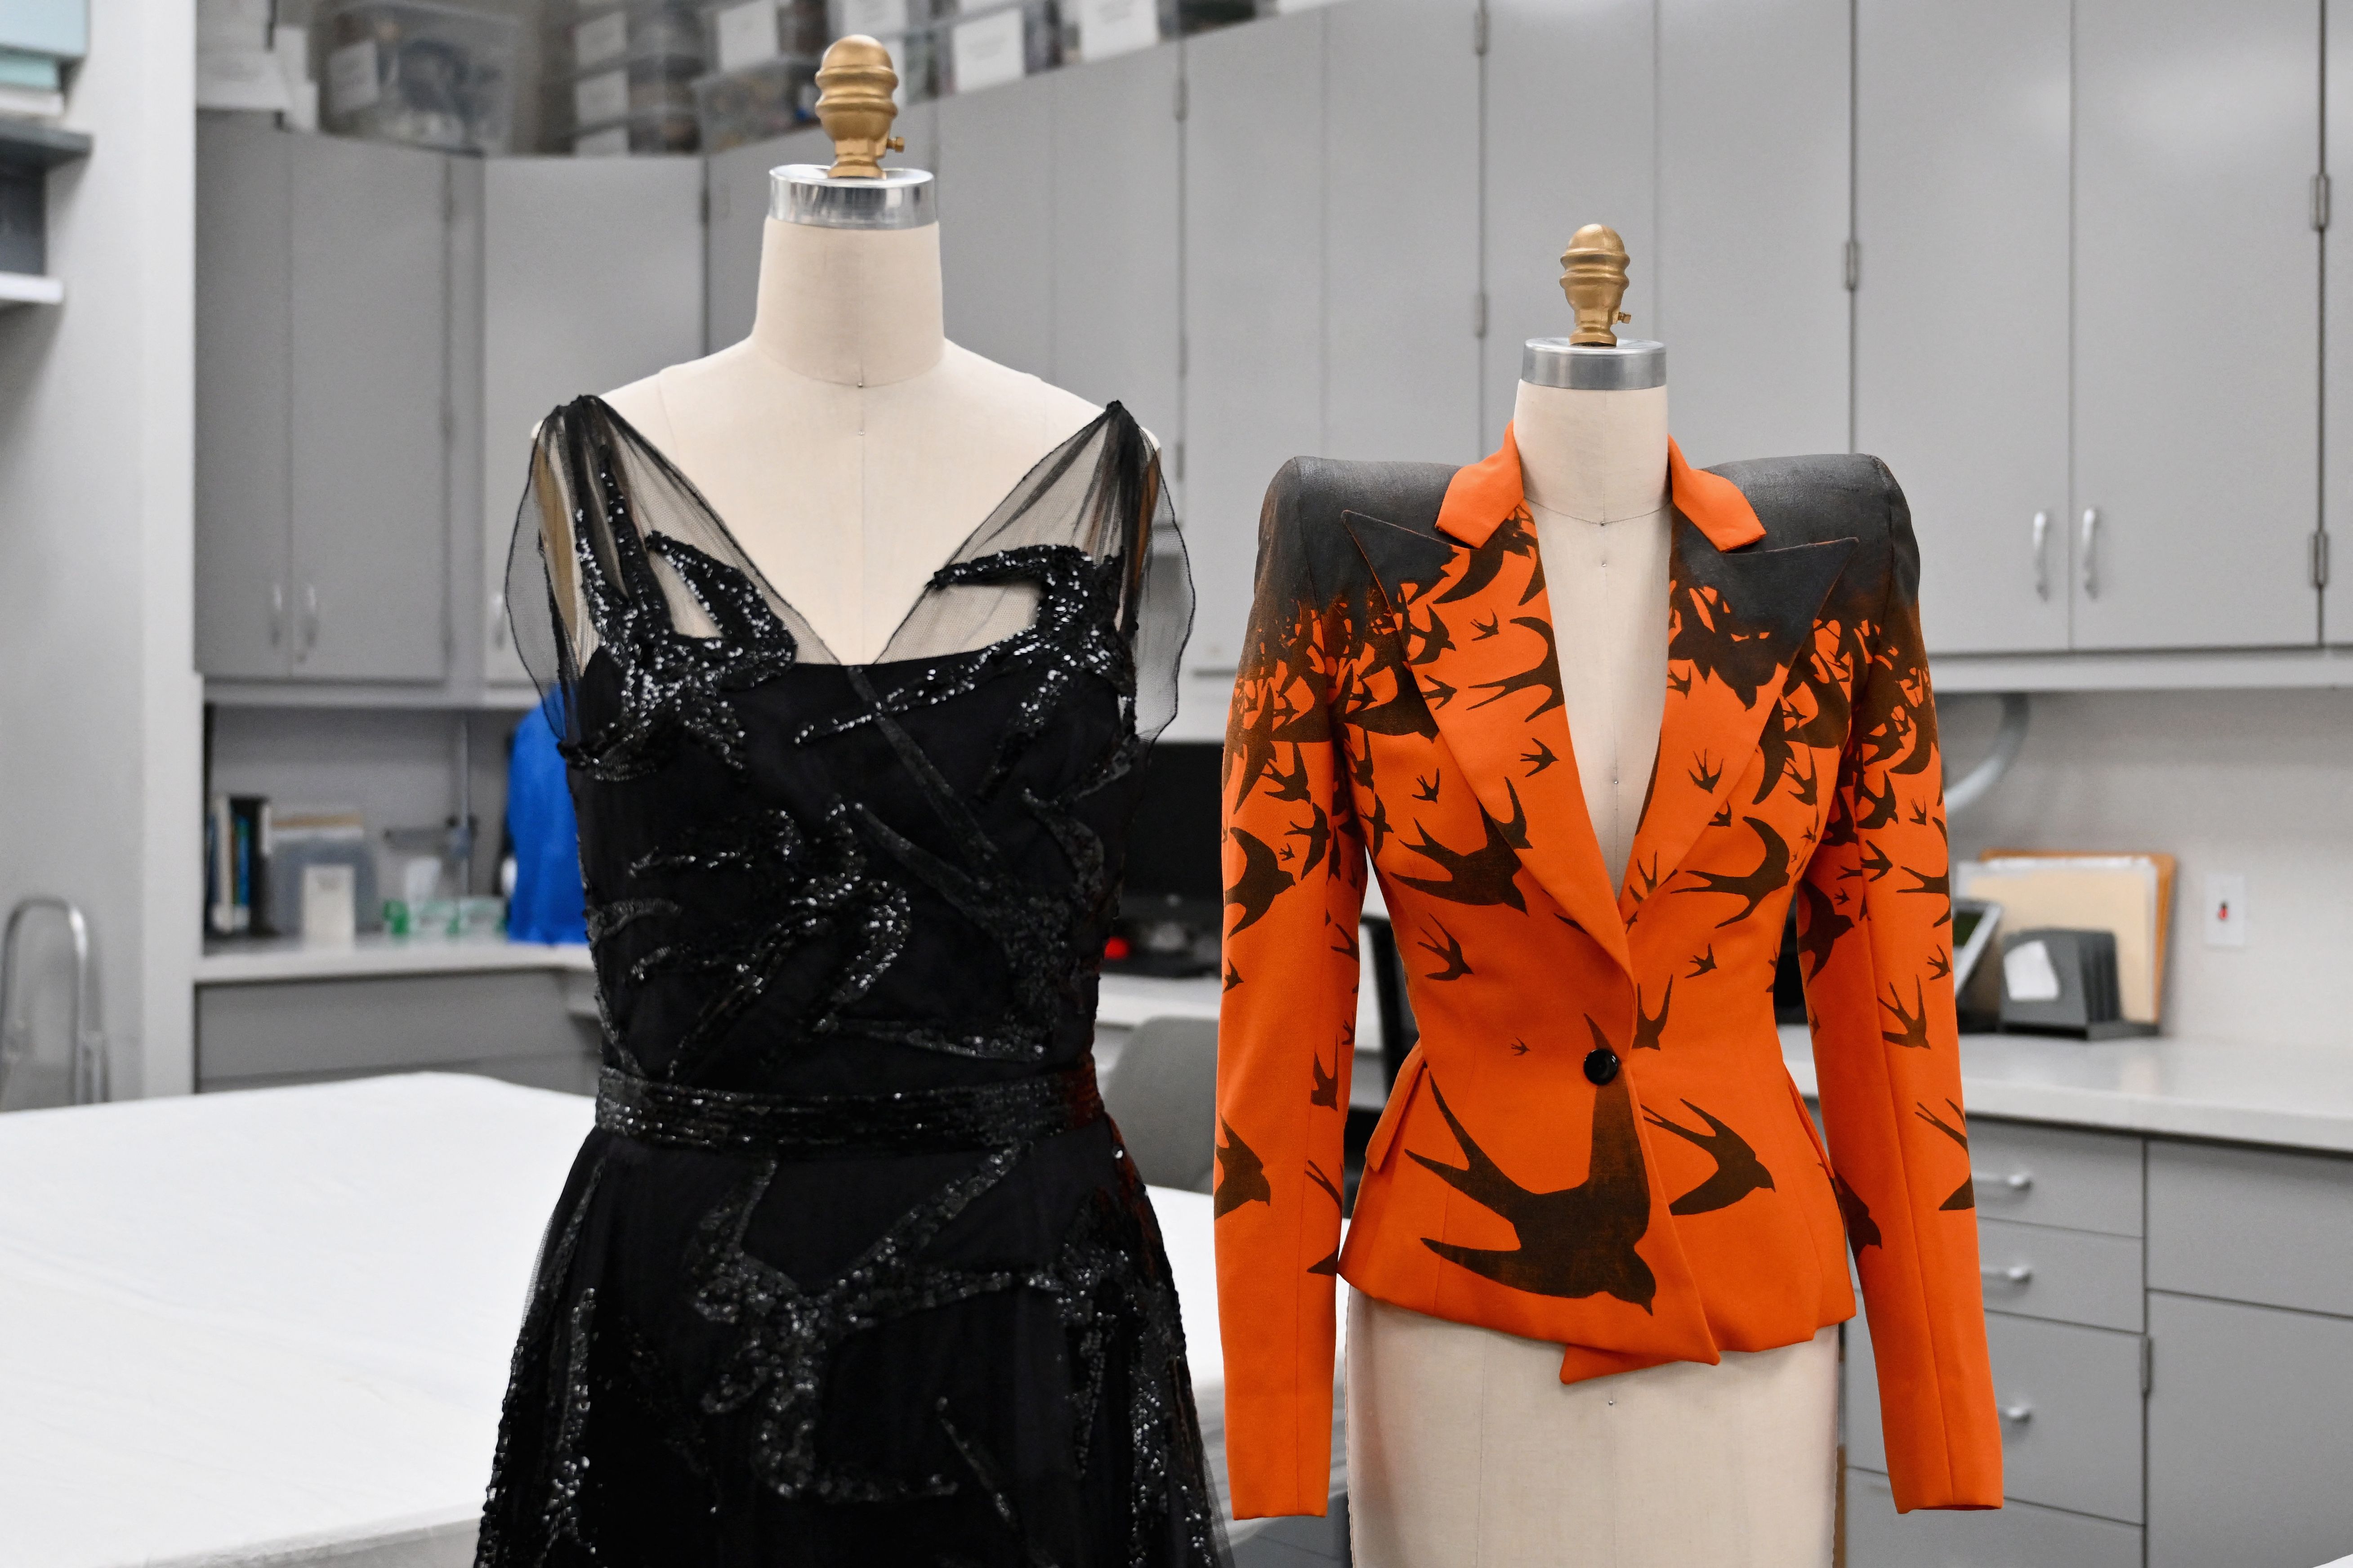 two mannequins, one with a black dress and one with an orange blazer